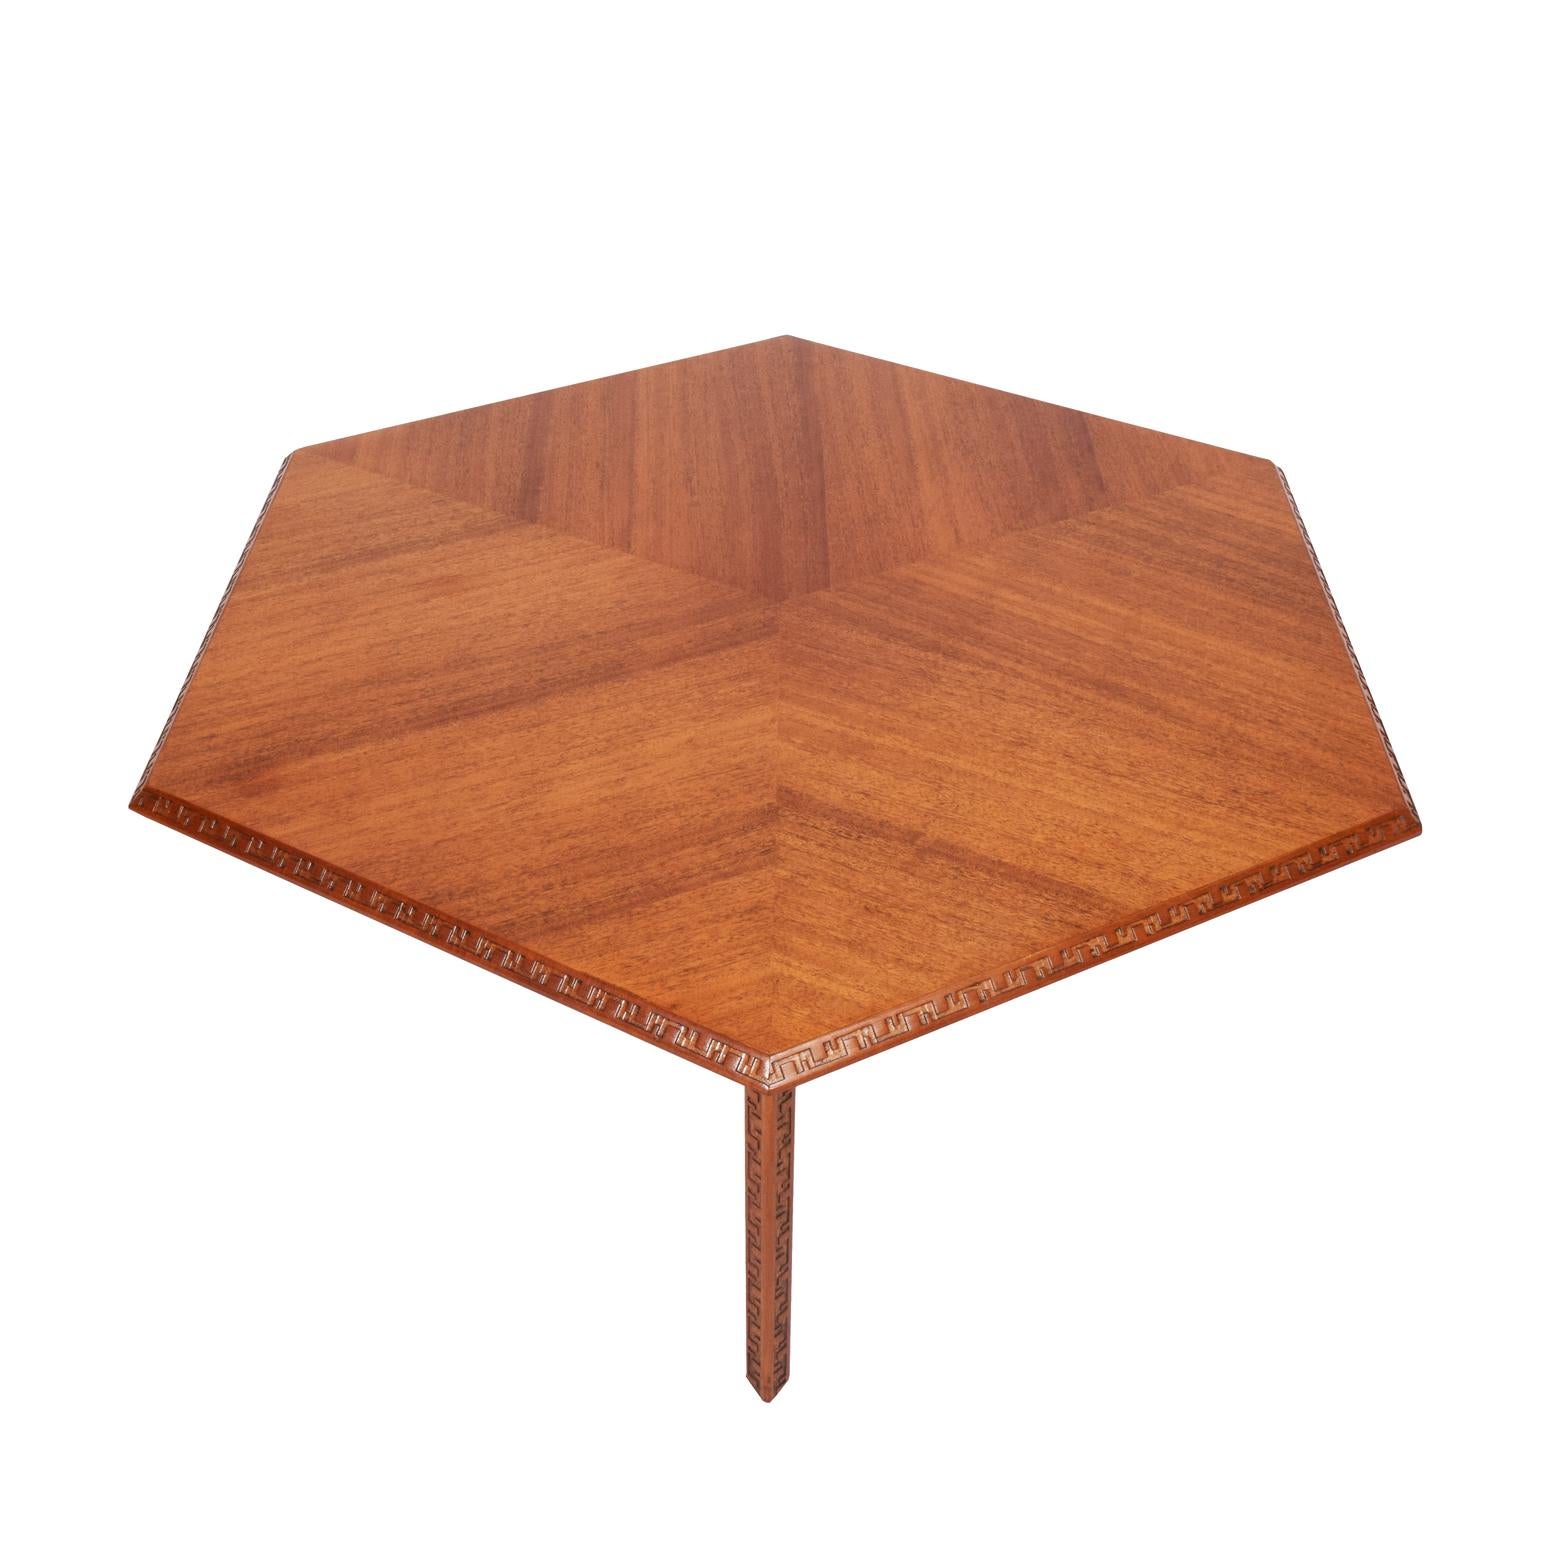 Mahogany six-sided coffee table with Taliesen designed hand-curved edge. Signed with manufacturer's mark. Made by Heritage Henredon.